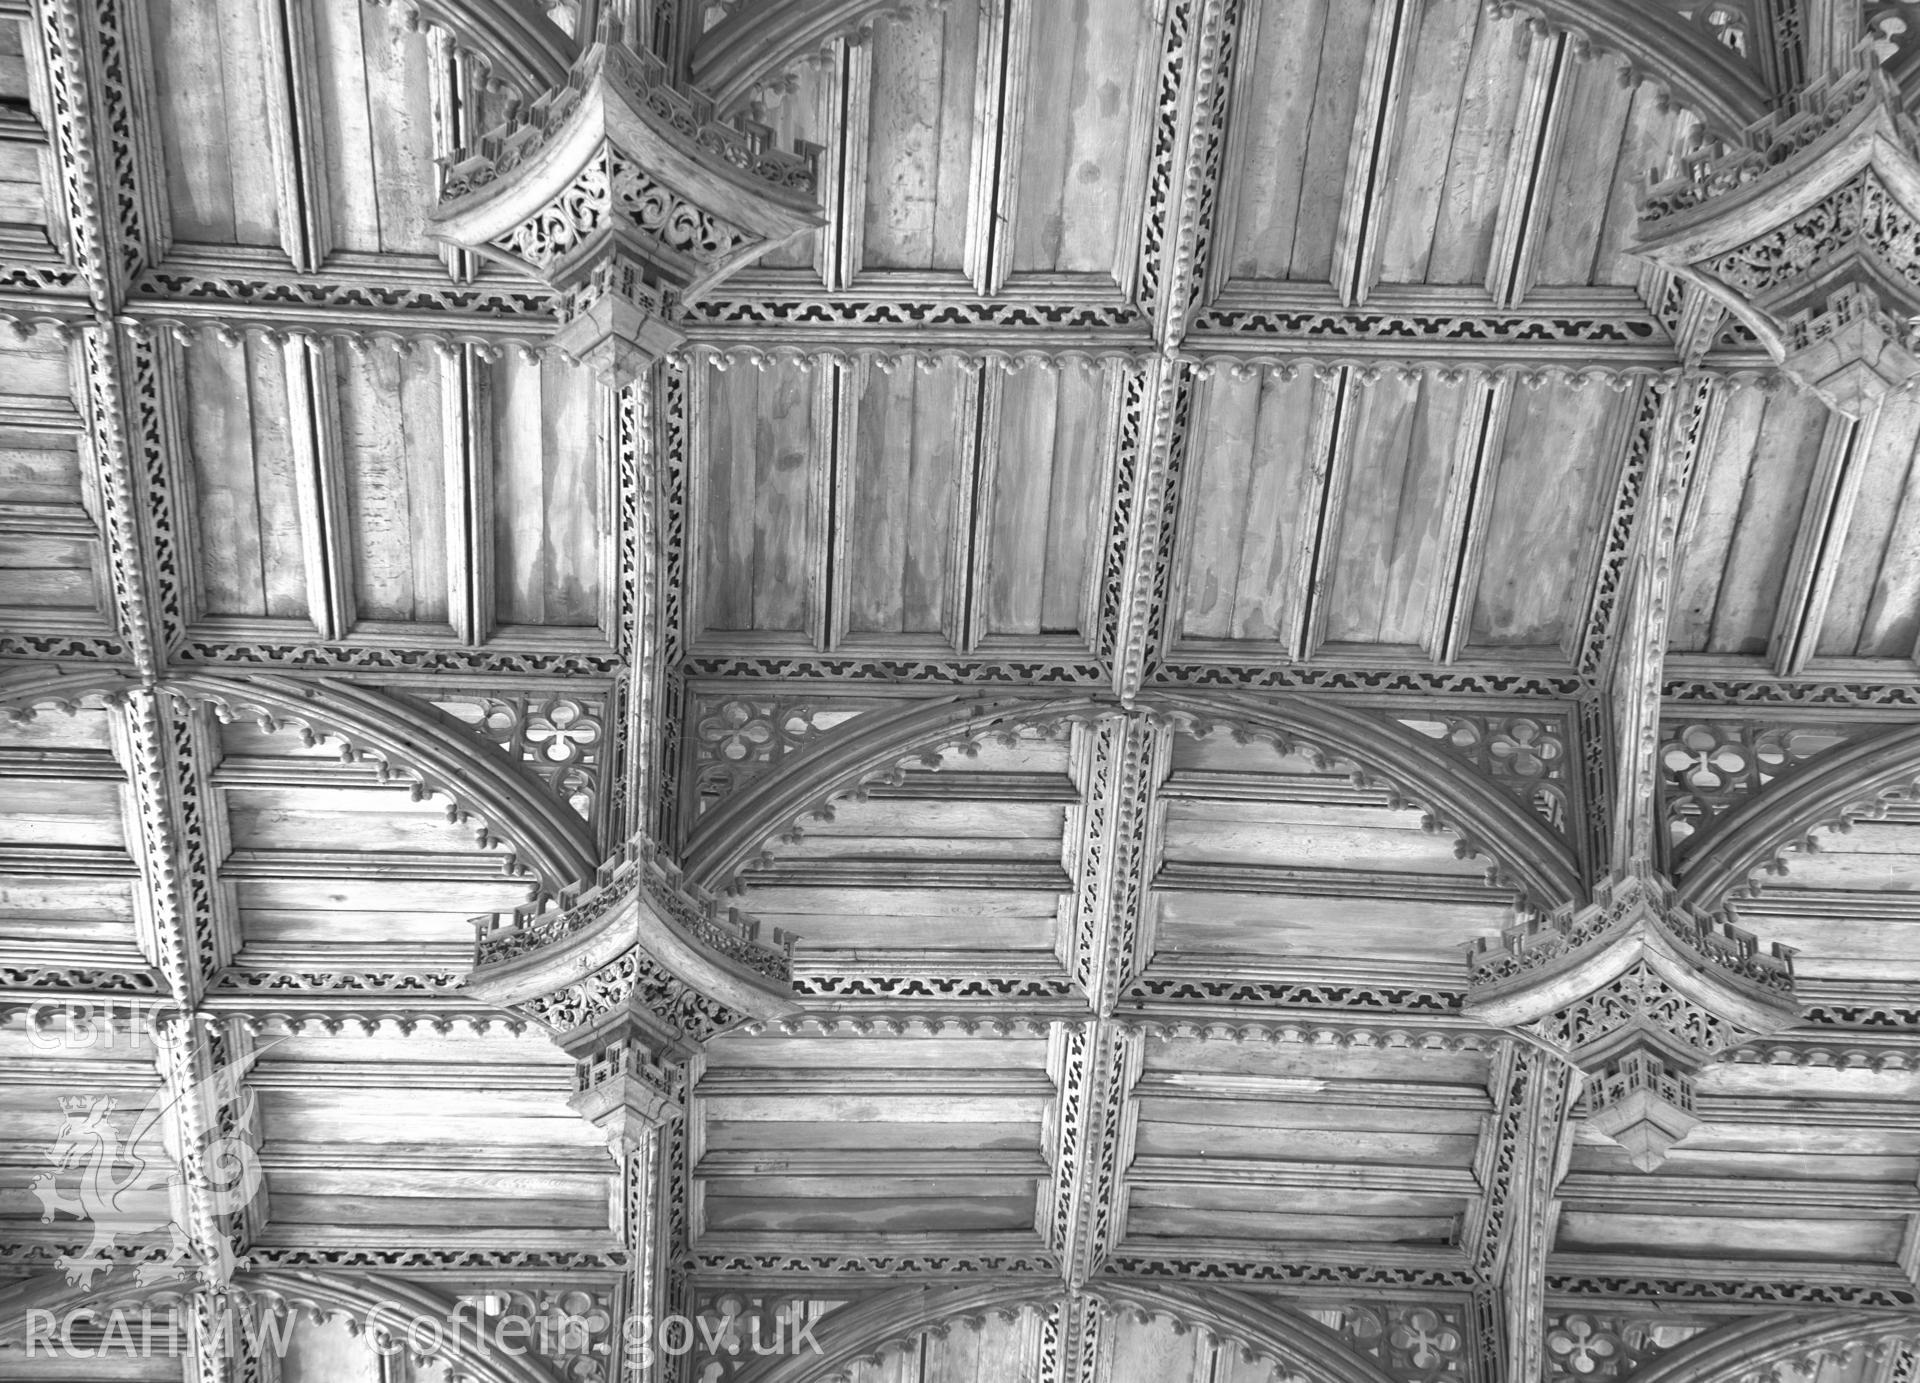 Digital copy of a black and white acetate negative showing detail of pendant ceiling at St. David's Cathedral, taken by E.W. Lovegrove, July 1936